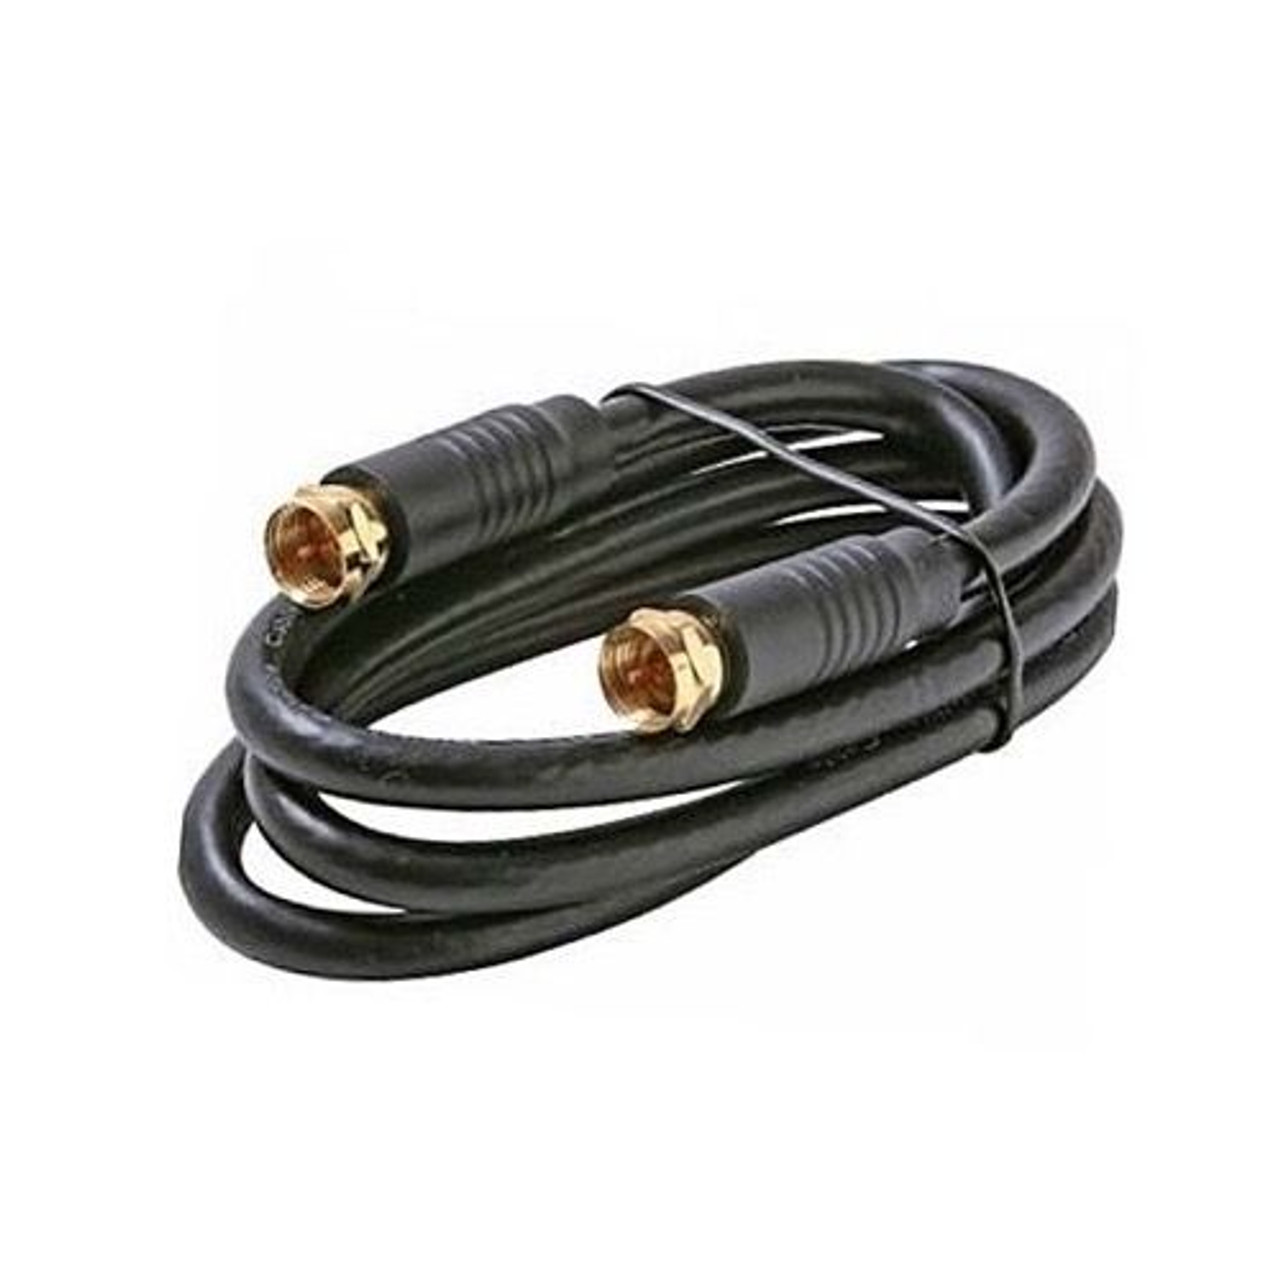 Eagle 25' FT RG6 Coaxial Cable Black with Gold F Connector Each End Satellite High Performance RG-6 F to F Audio Video Signal 75 Ohm Component Shielded Connector HDTV Jumper